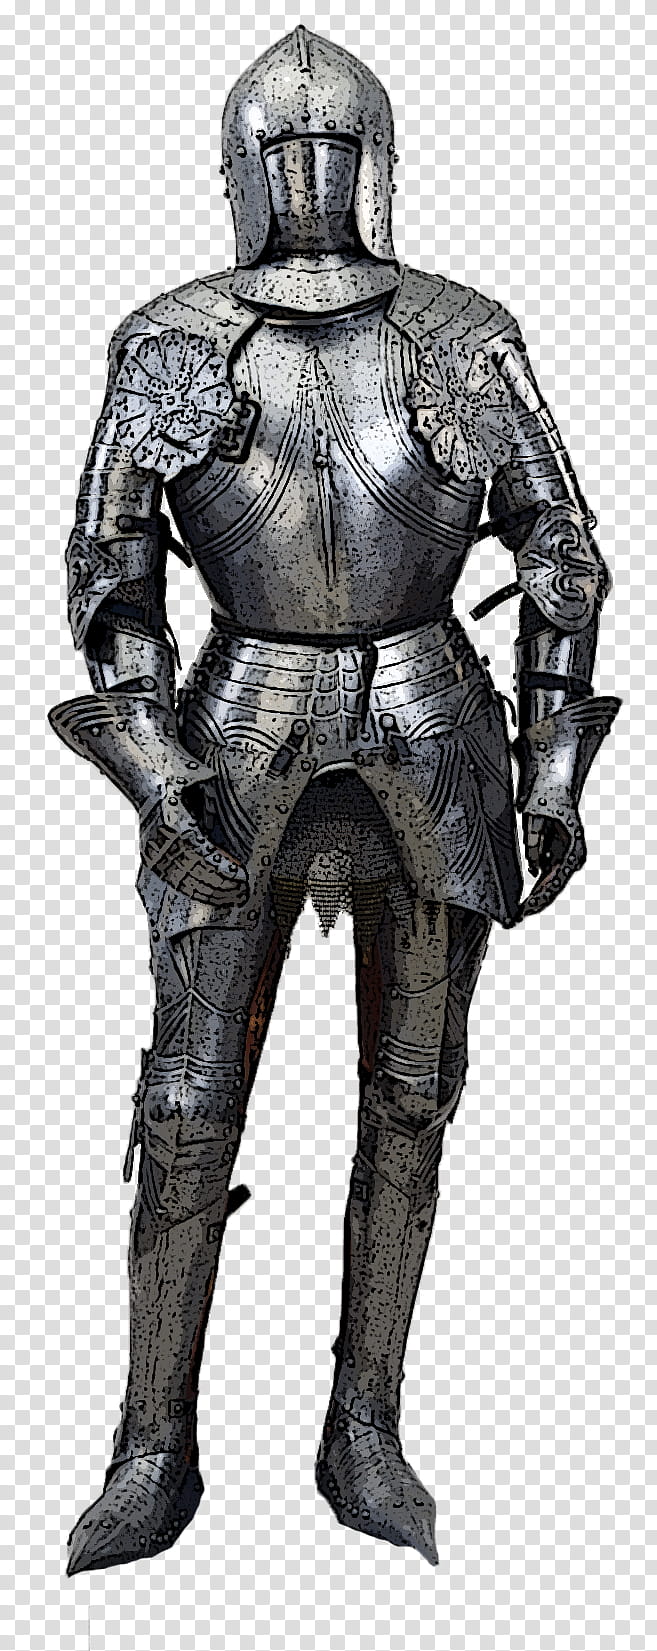 Knight, Middle Ages, Body Armor, Armour, Cuirass, Arms And Armor, Weapon, Brigandine transparent background PNG clipart